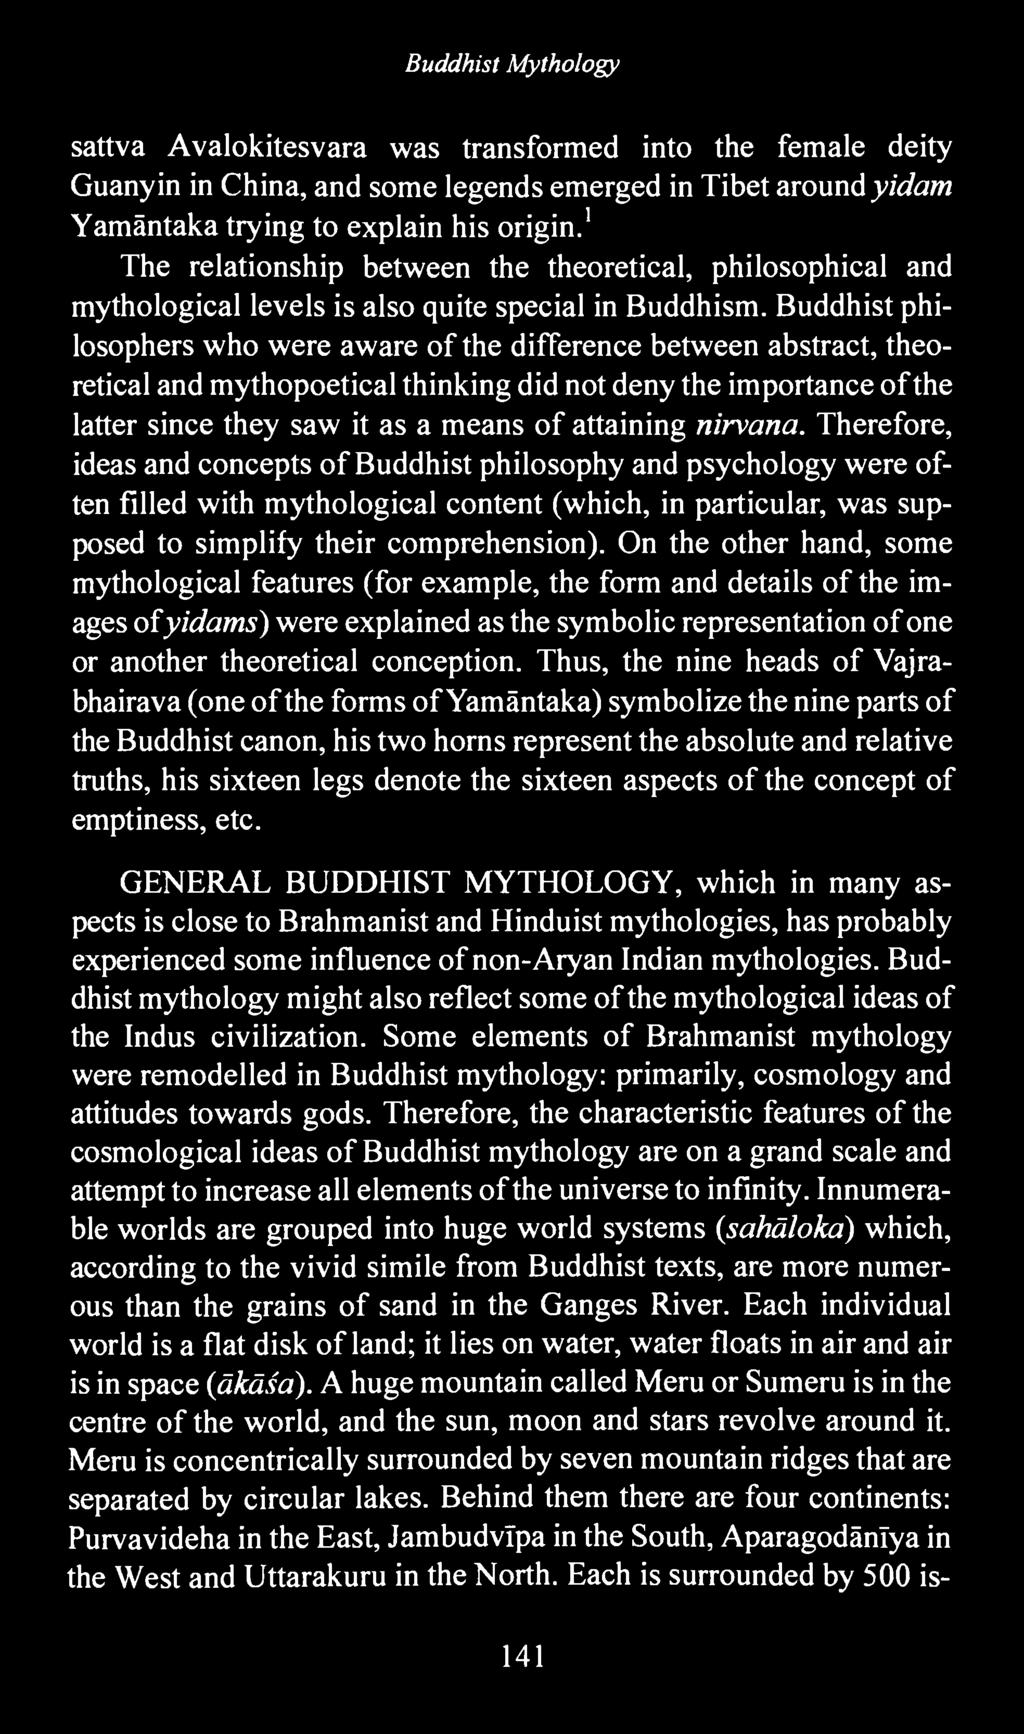 Buddhist philosophers who were aware of the difference between abstract, theoretical and mythopoetical thinking did not deny the importance of the latter since they saw it as a means of attaining